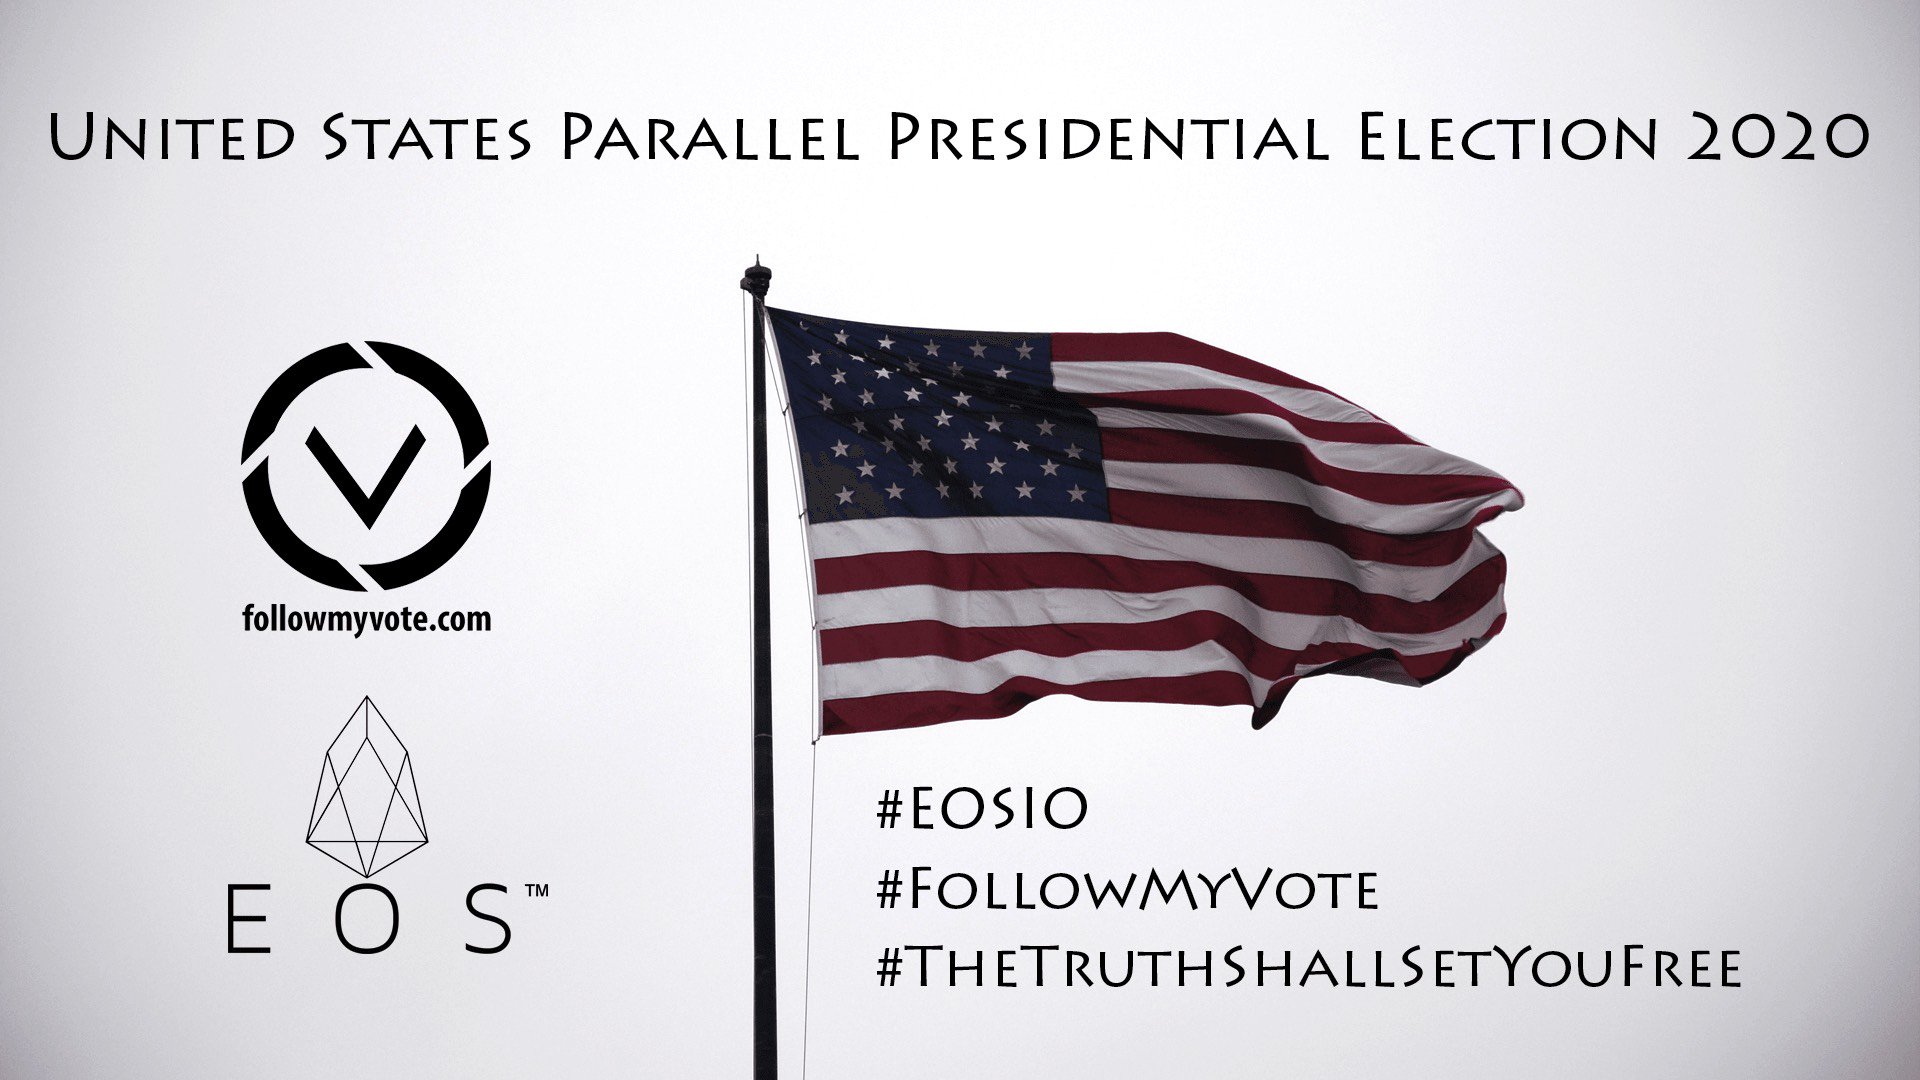 2020 United States Parallel Presidential Election on EOSIO